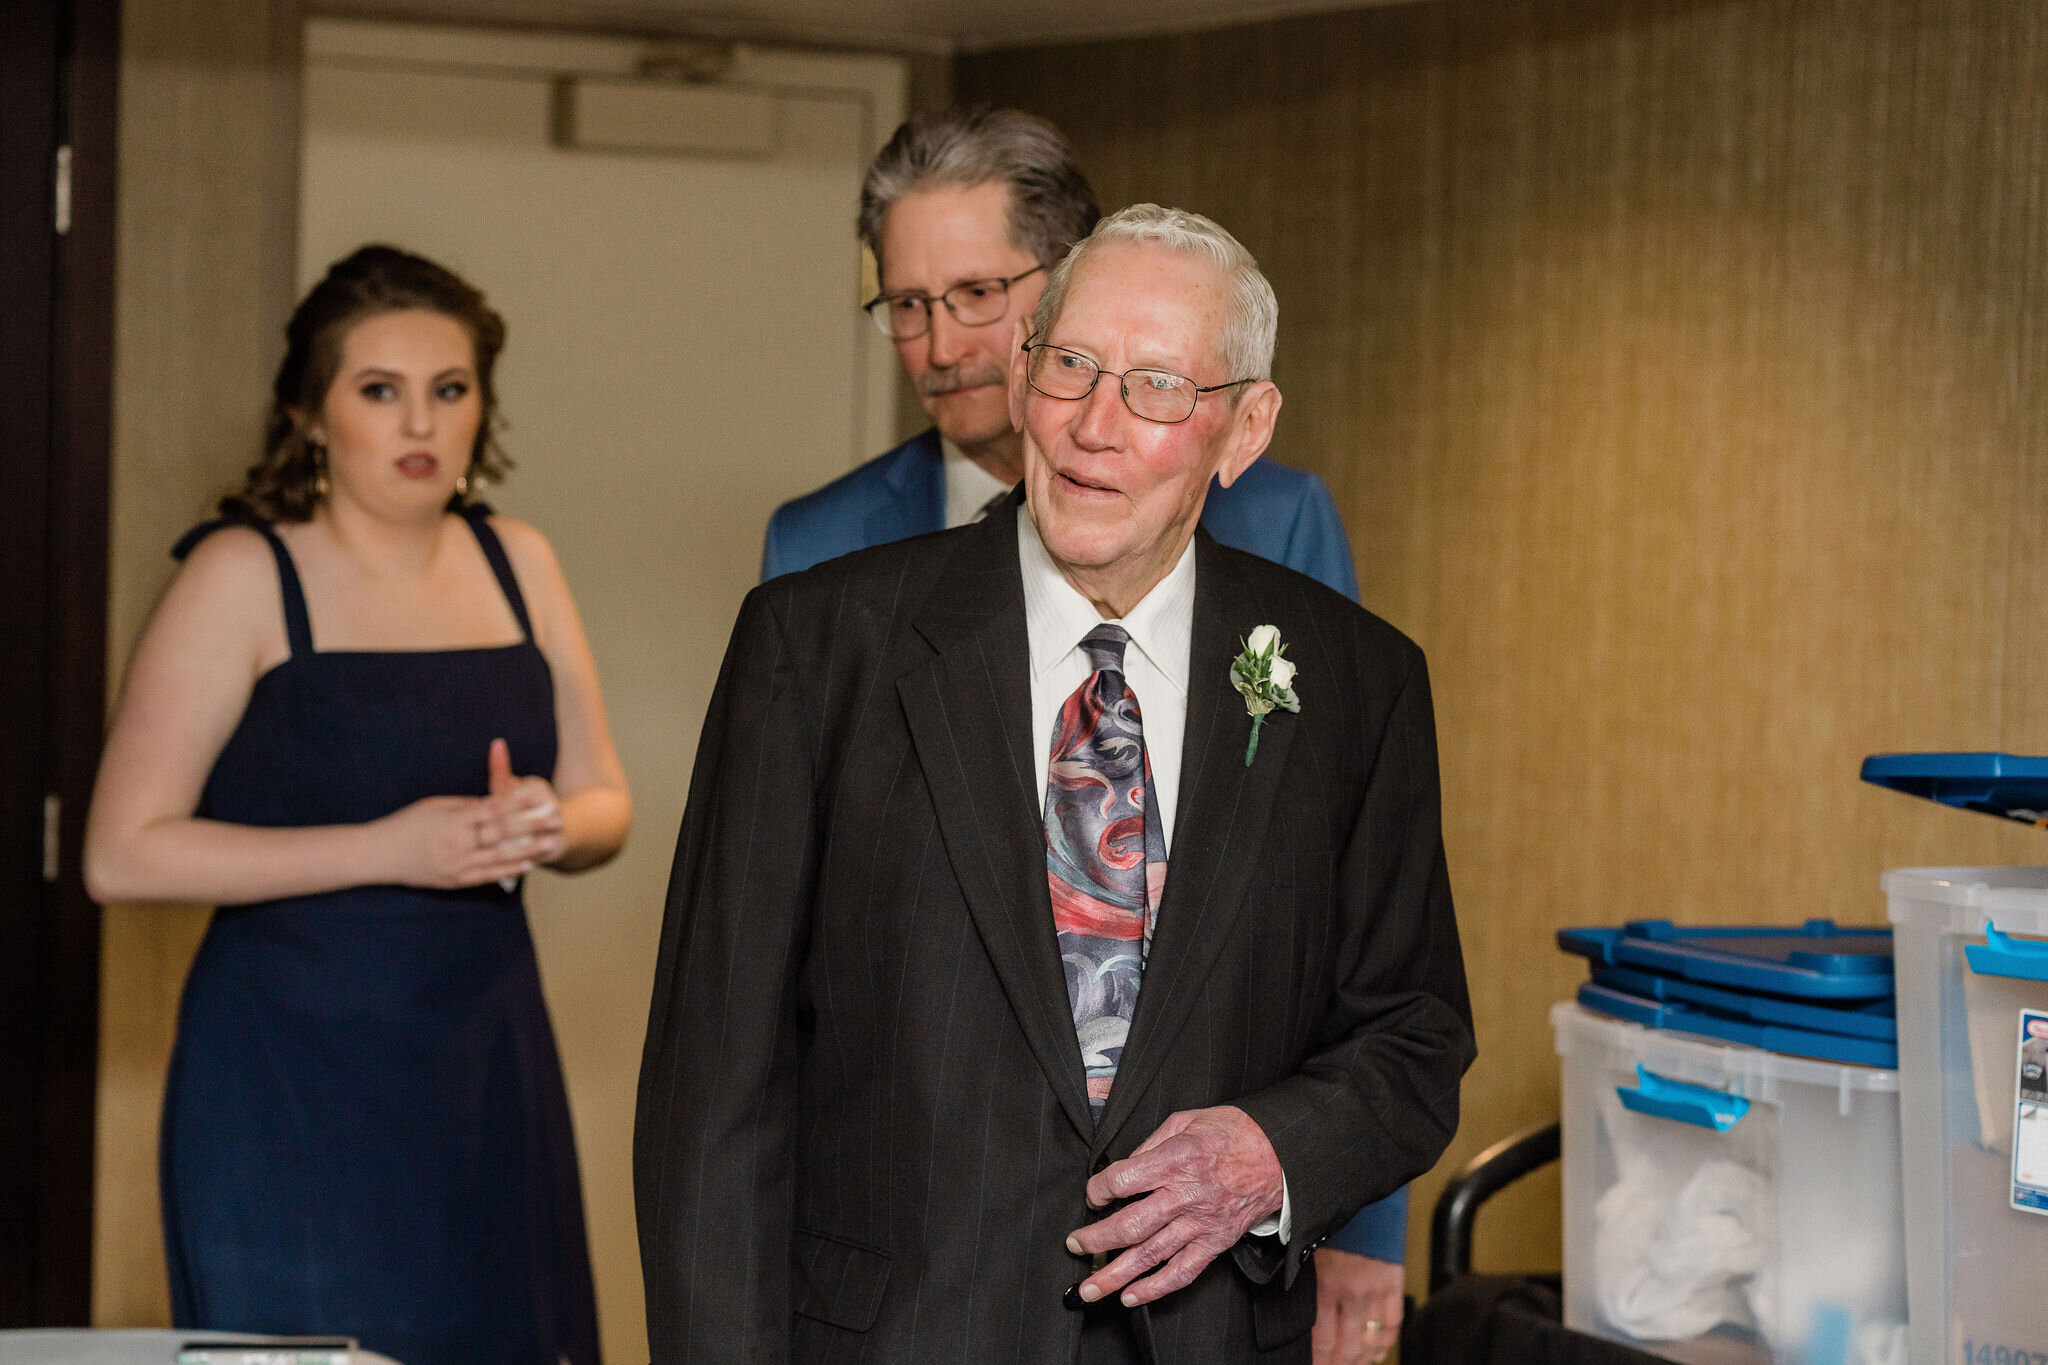 Grandpa seeing bride for the first time